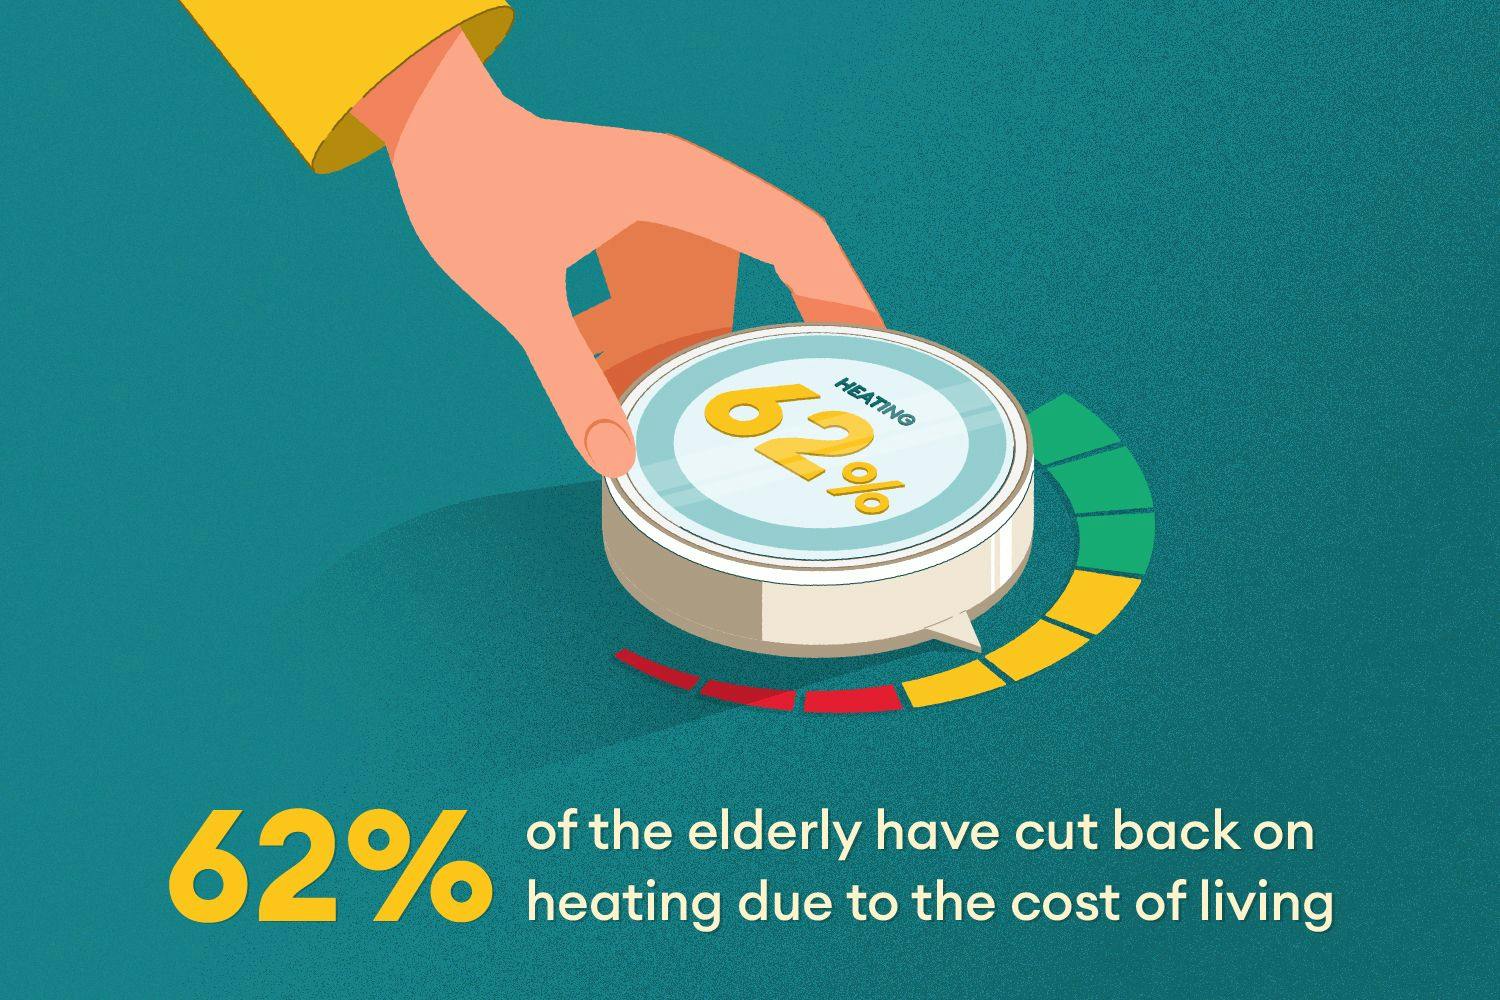 Text: '62% of the elderly have cut back on heating due to the cost of living'